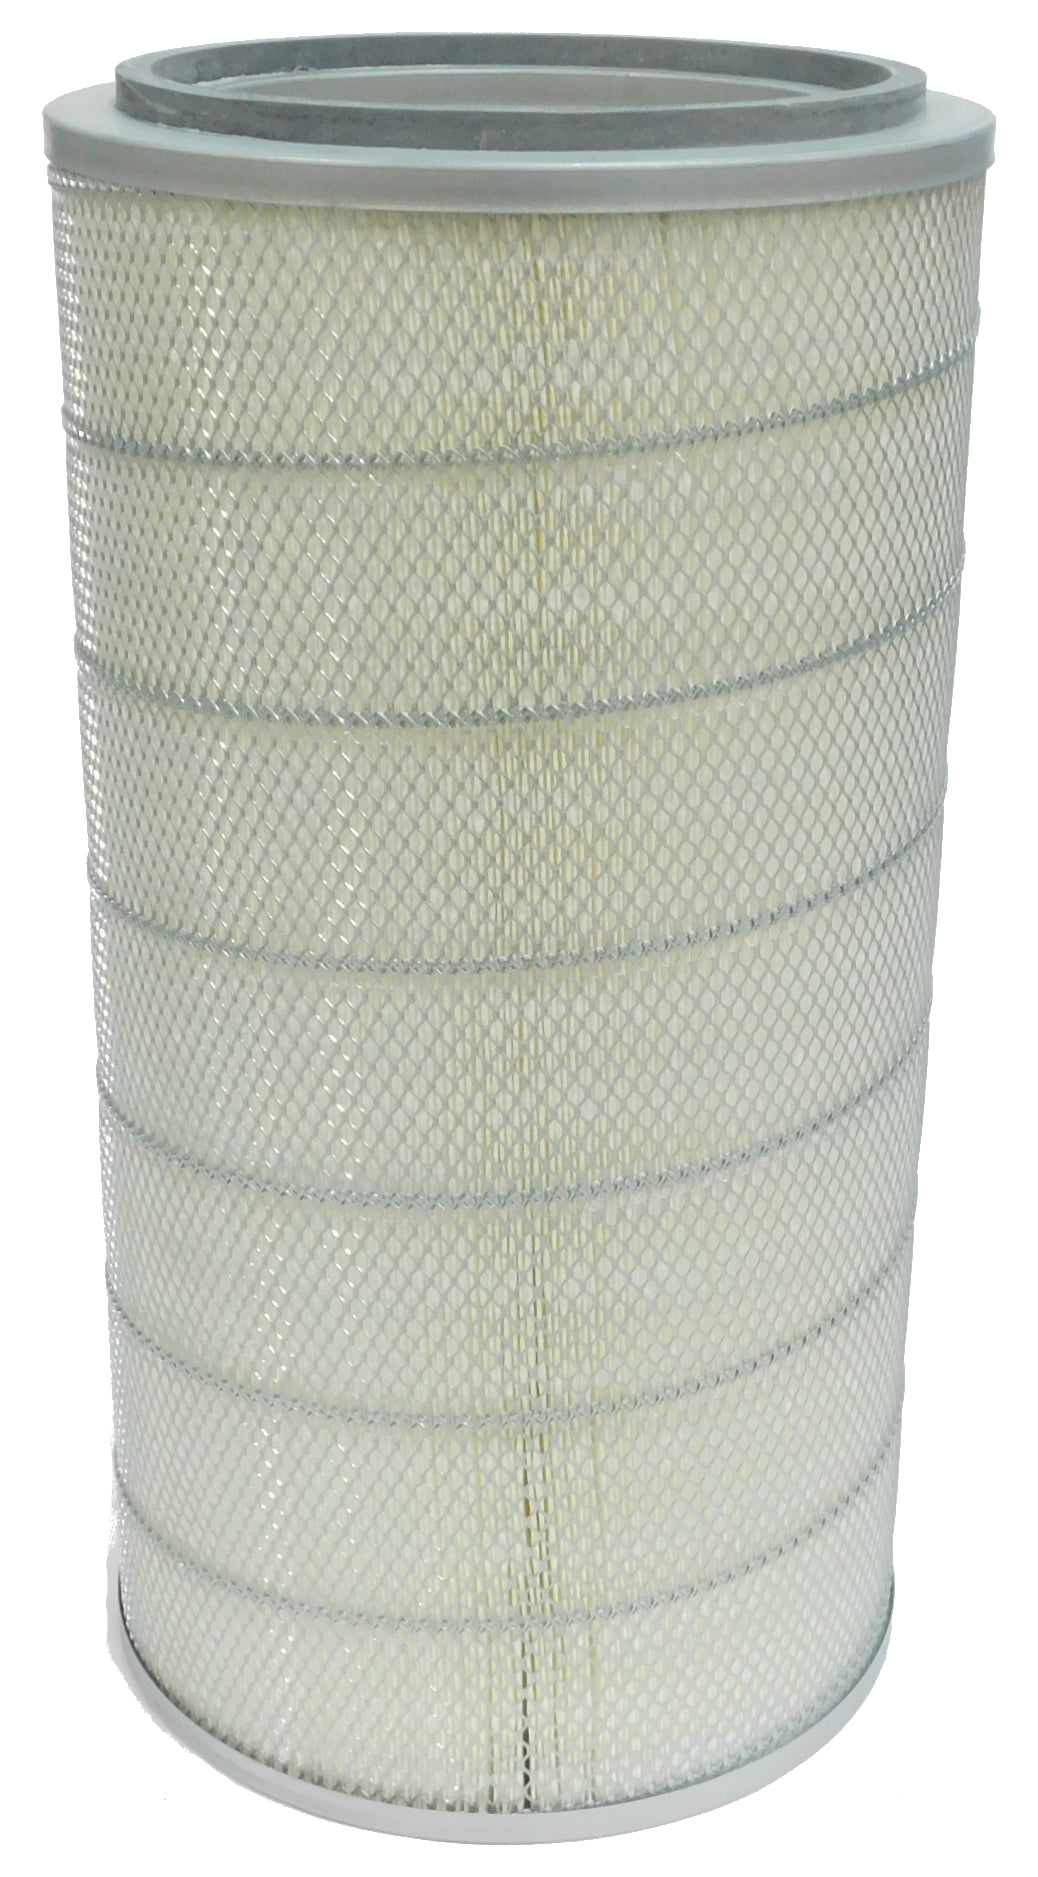 A44559C1 - Mikropul - OEM Replacement Filter